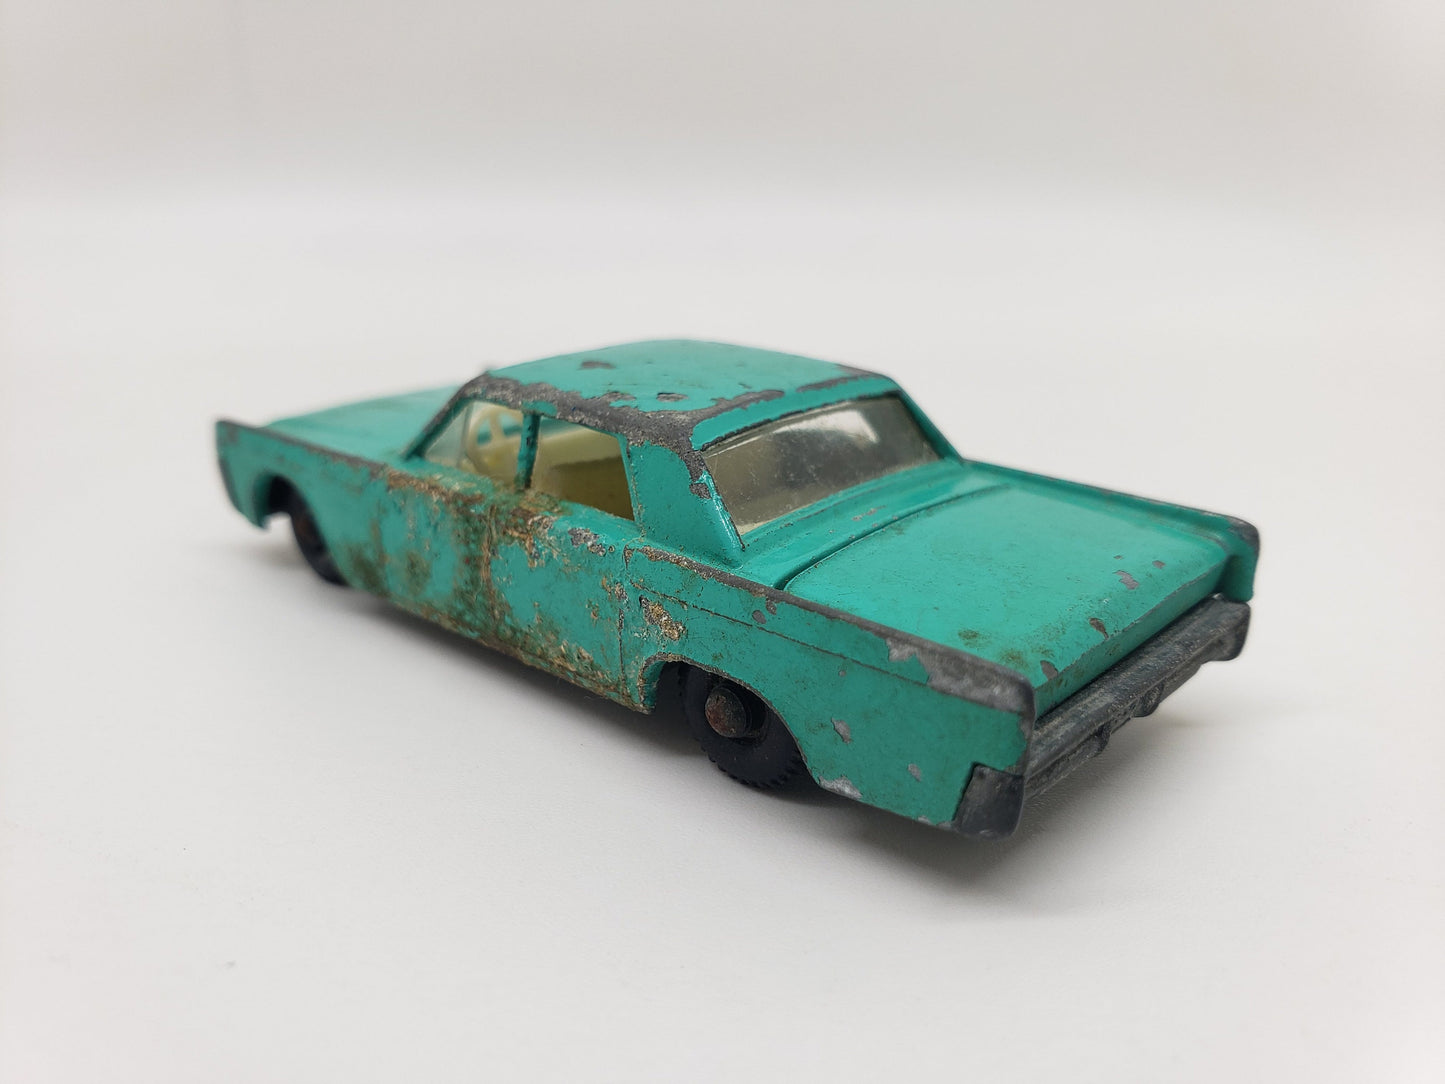 Matchbox 1967 Lincoln Continental Turquoise Vintage Lesney Collectable Scale Model Miniature Toy Car Perfect Birthday Gift